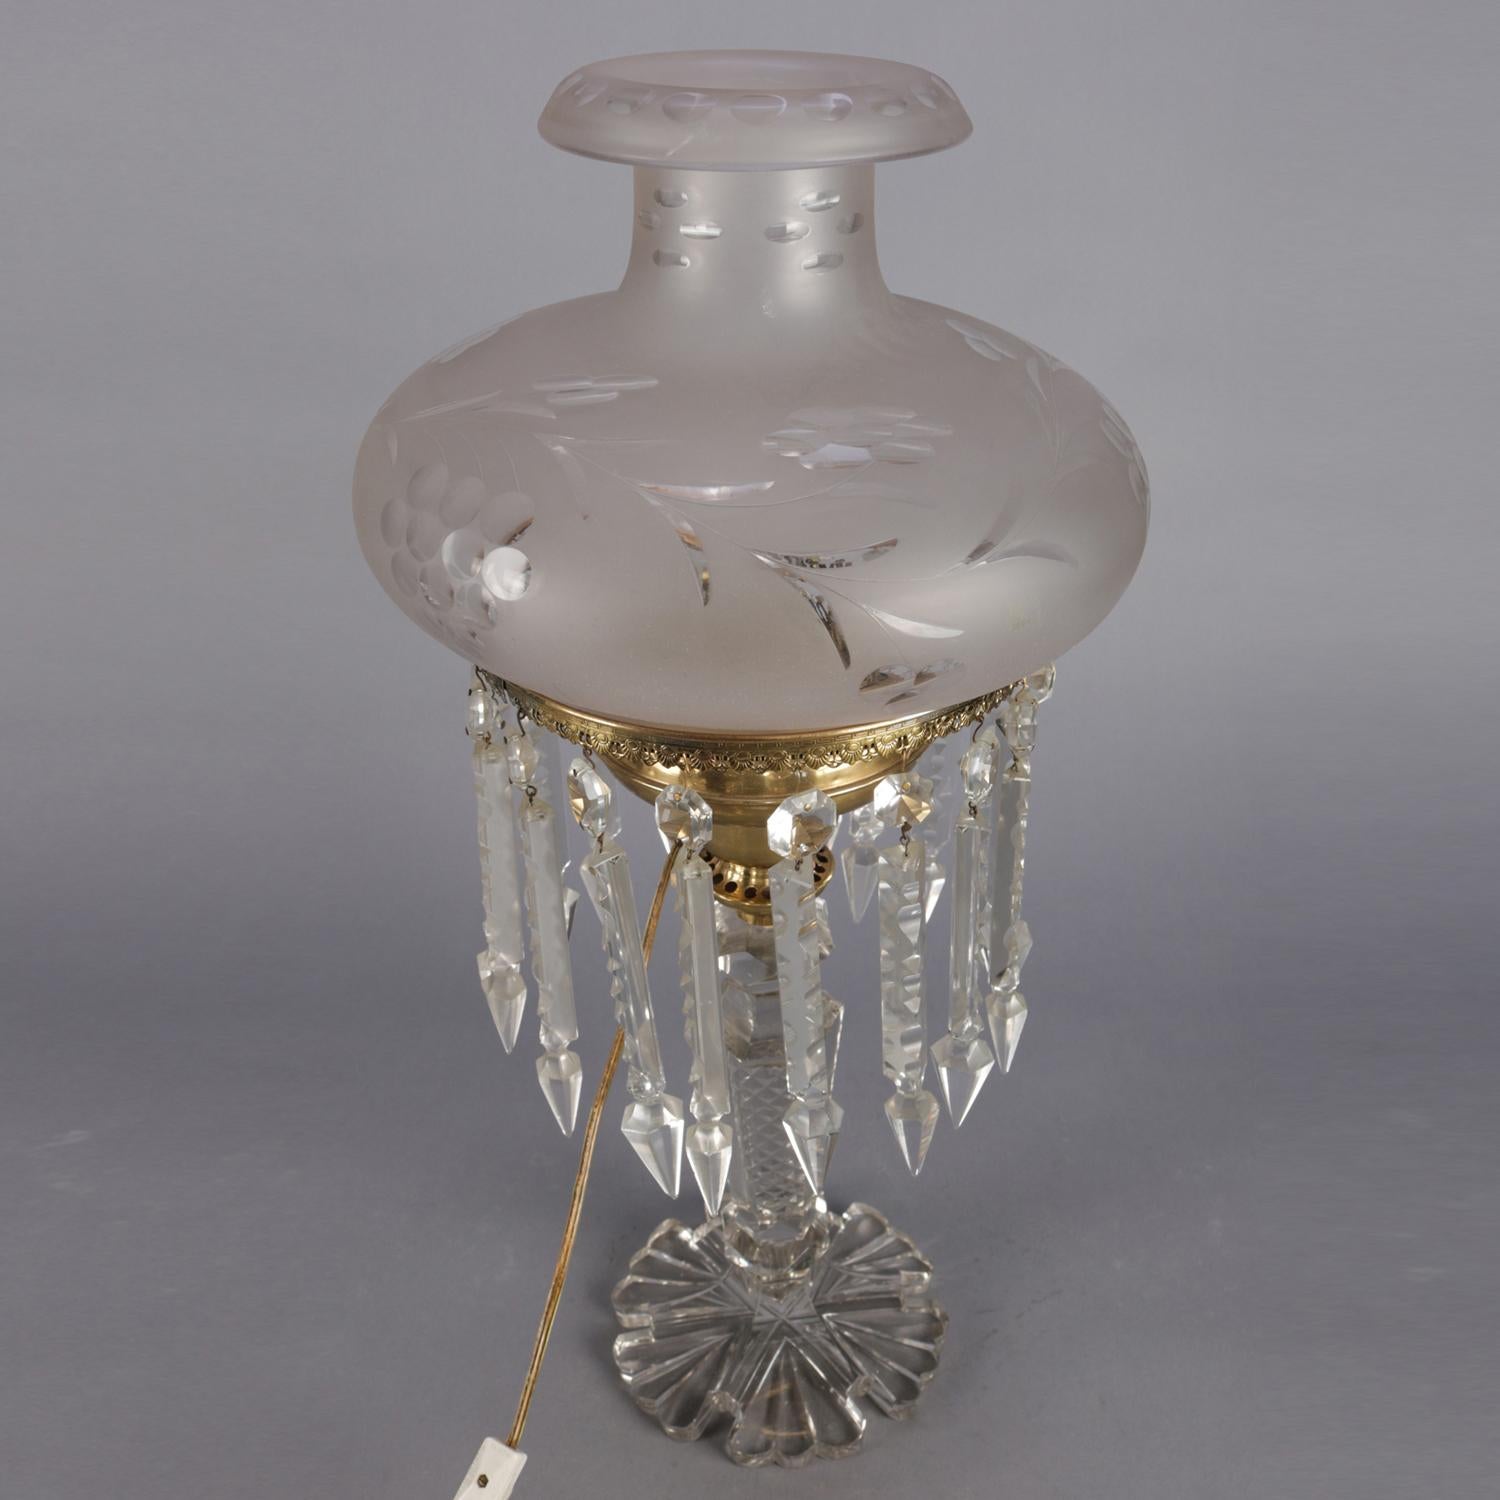 Frosted Antique Crystal & Brass J.G. Webb Electrified Solar Lamp with Prisms, circa 1840